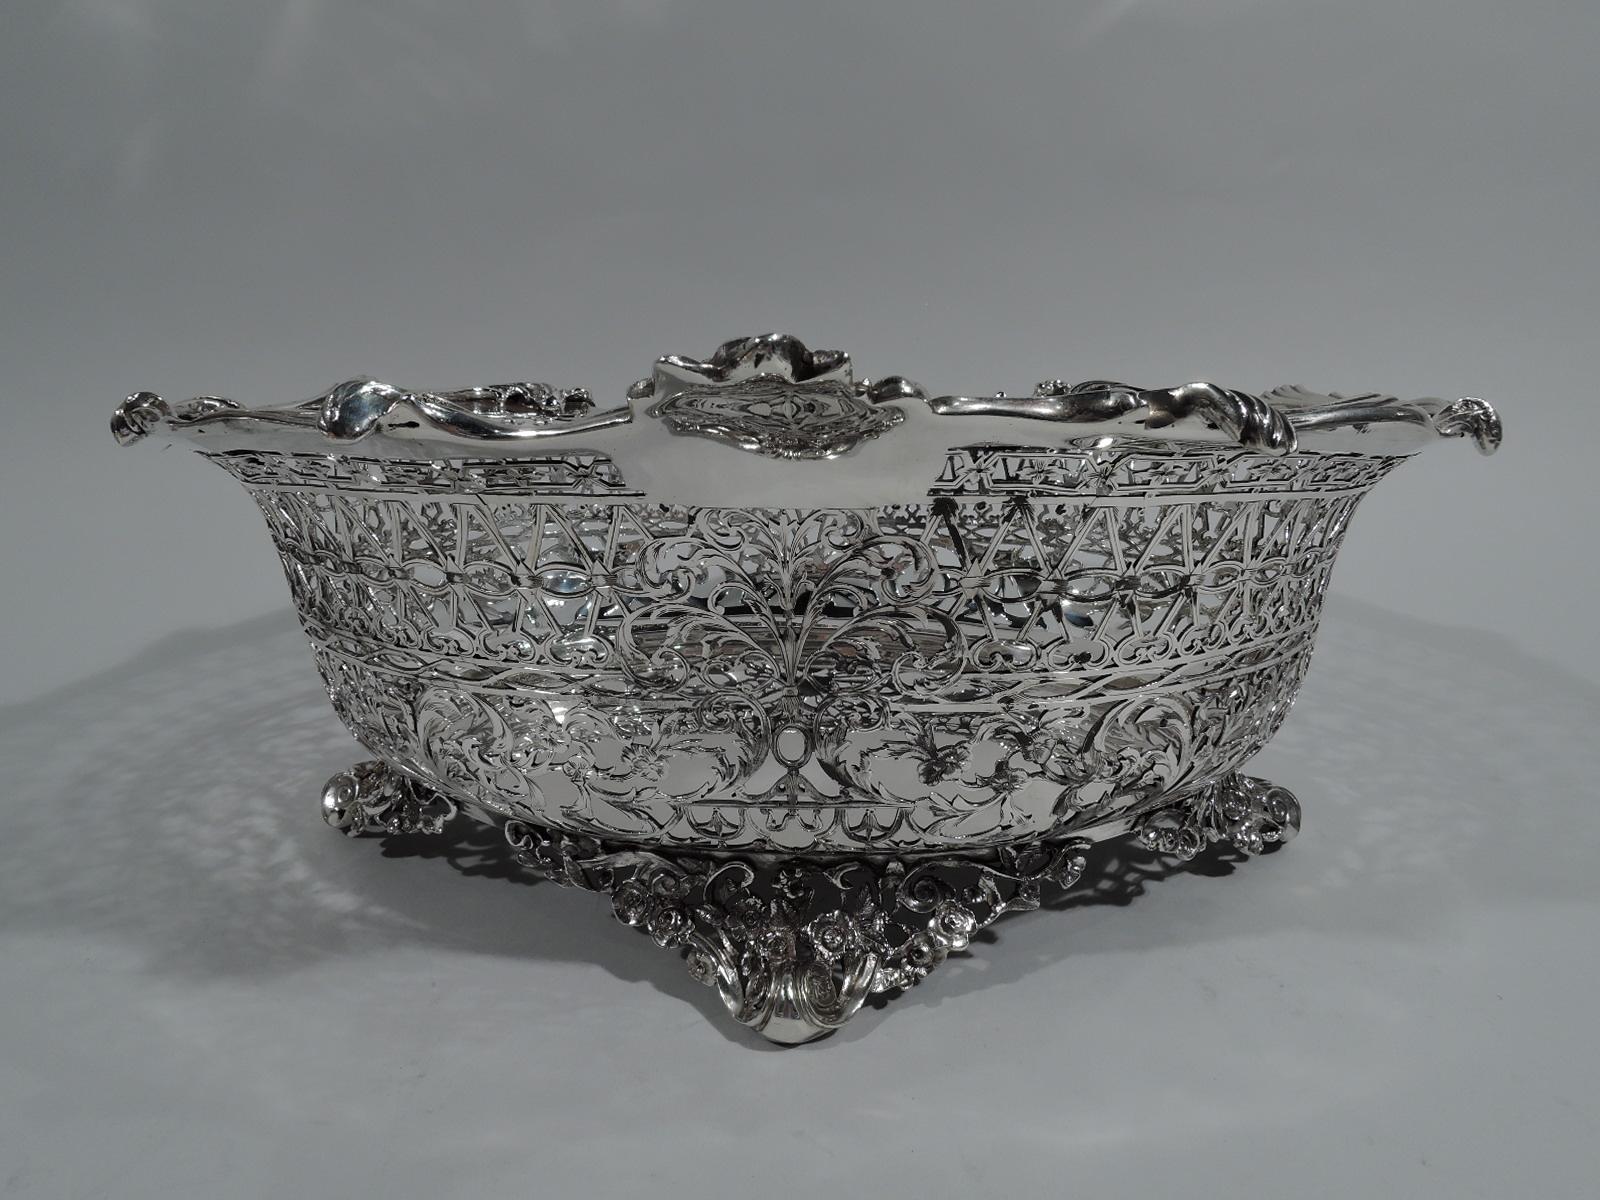 George V sterling silver centerpiece bowl. Made by William Comyns in London in 1911. Oval with solid well and pierced sides. Piercing includes flowers and leaves as well as geometric ornament. Asymmetrical rim has applied scrolls, flowers, and